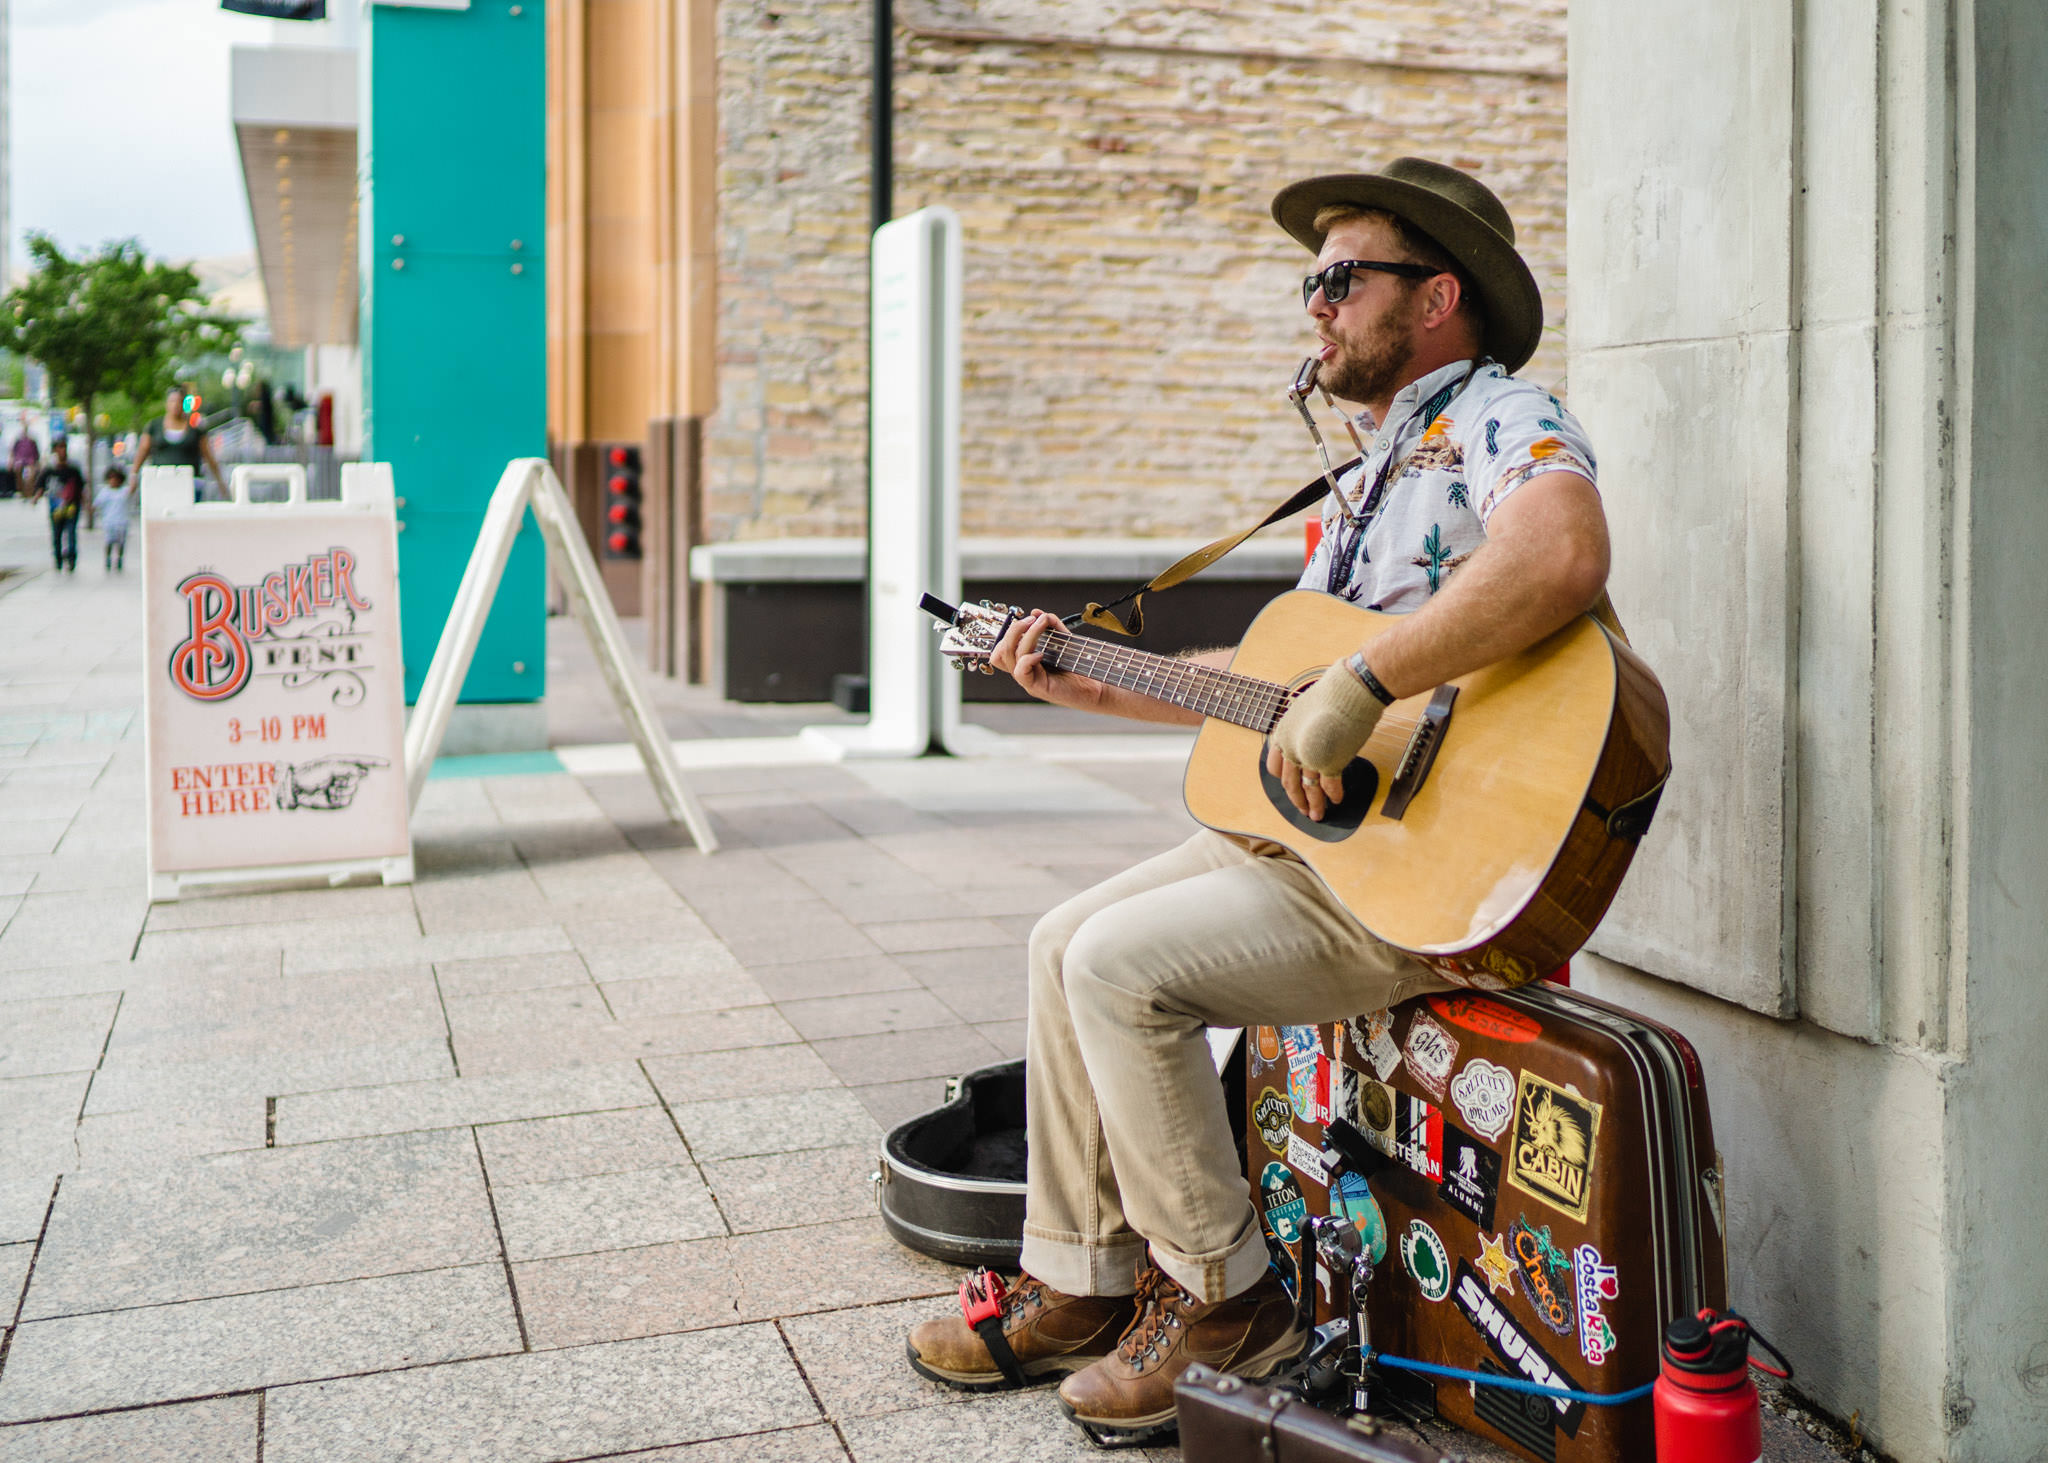 Busker/Street Performer playing his guitar on the sidewalk